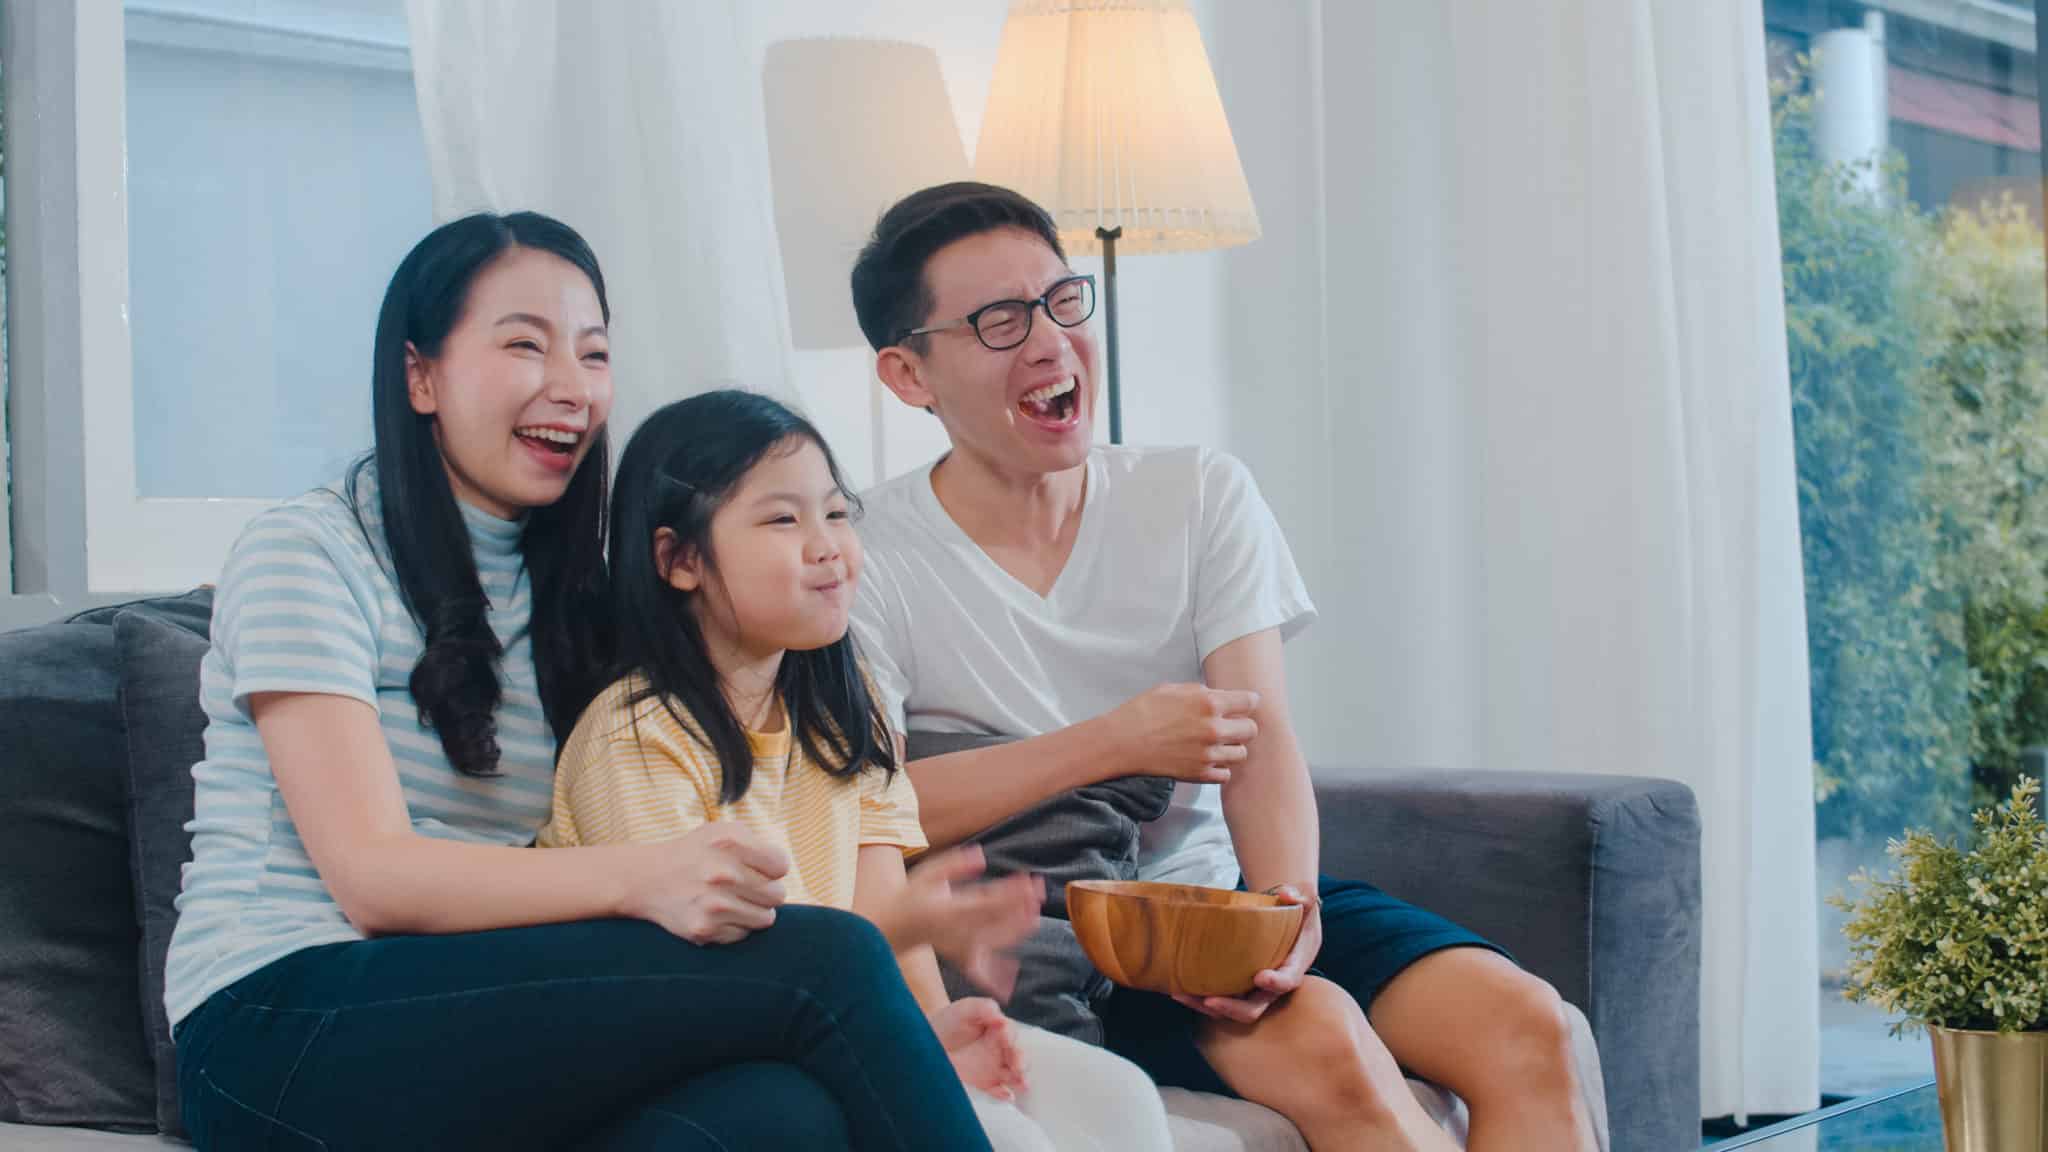 Throw on some popcorn and snuggle up together on the lounge and enjoy the incredible range of movies available online. For tips on what the kids might like, you can check out our list here.